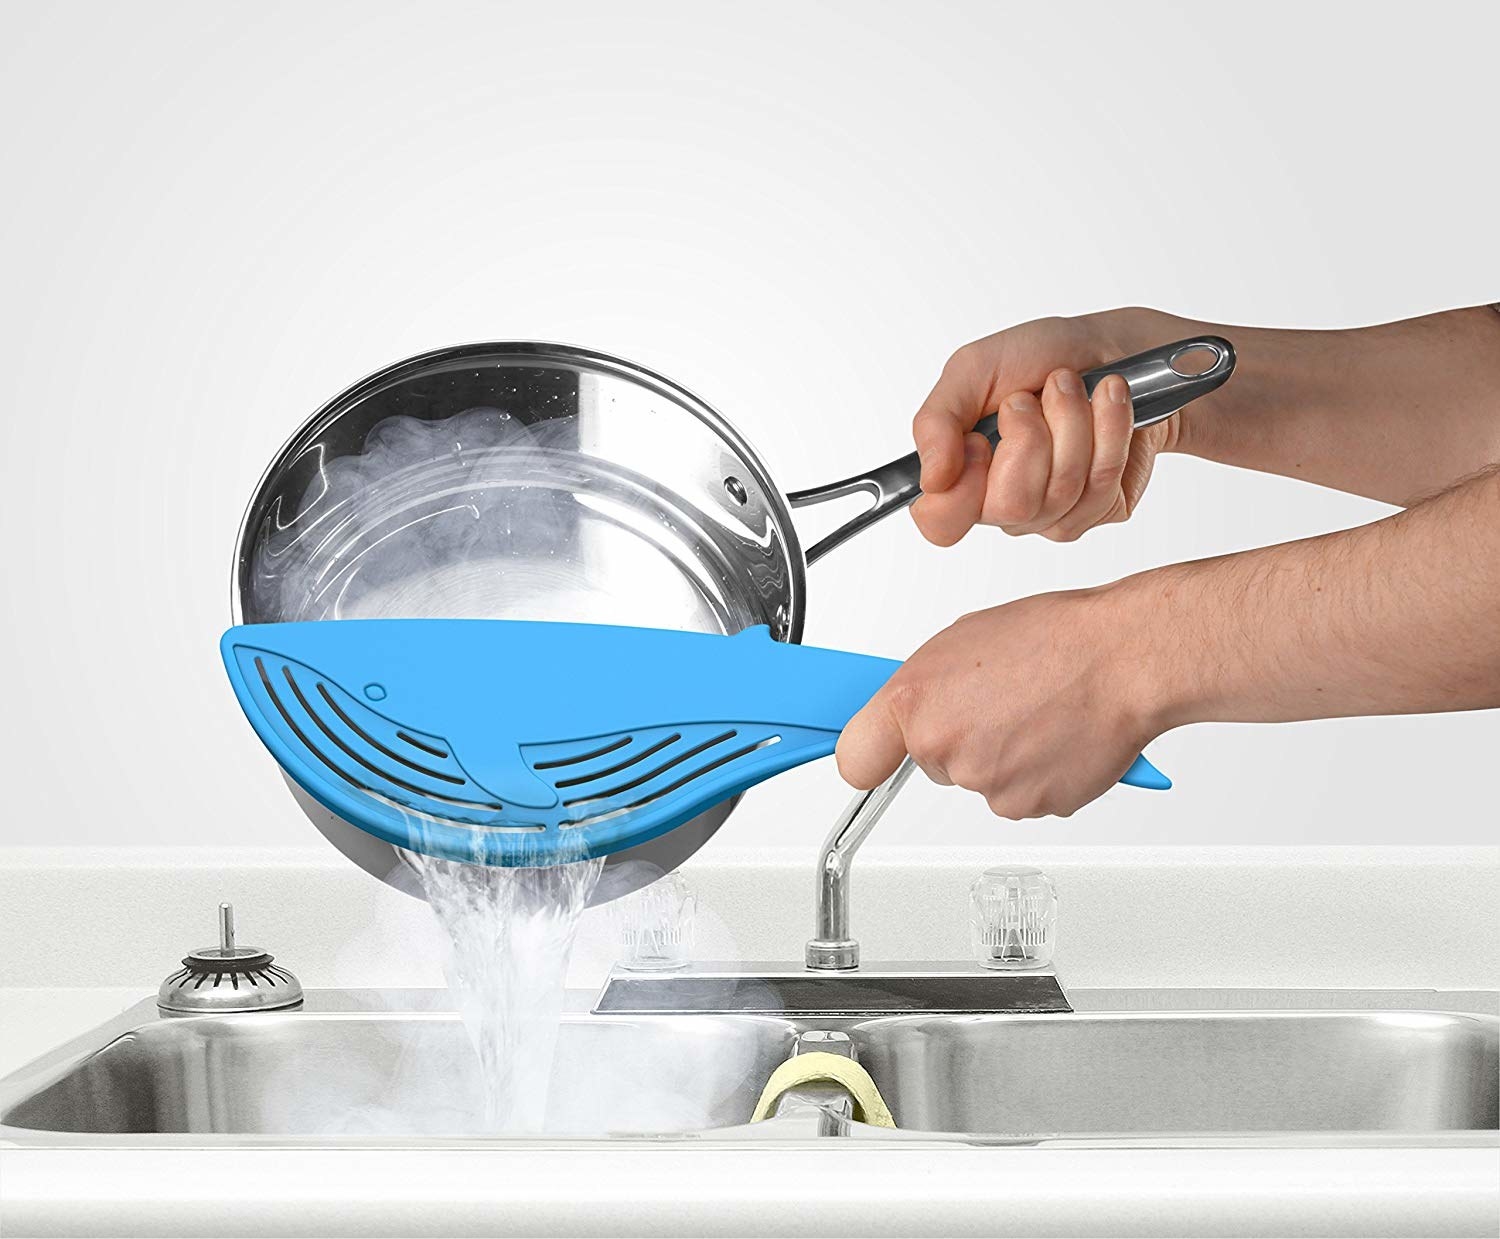 A person using the whale-shaped tool to drain water